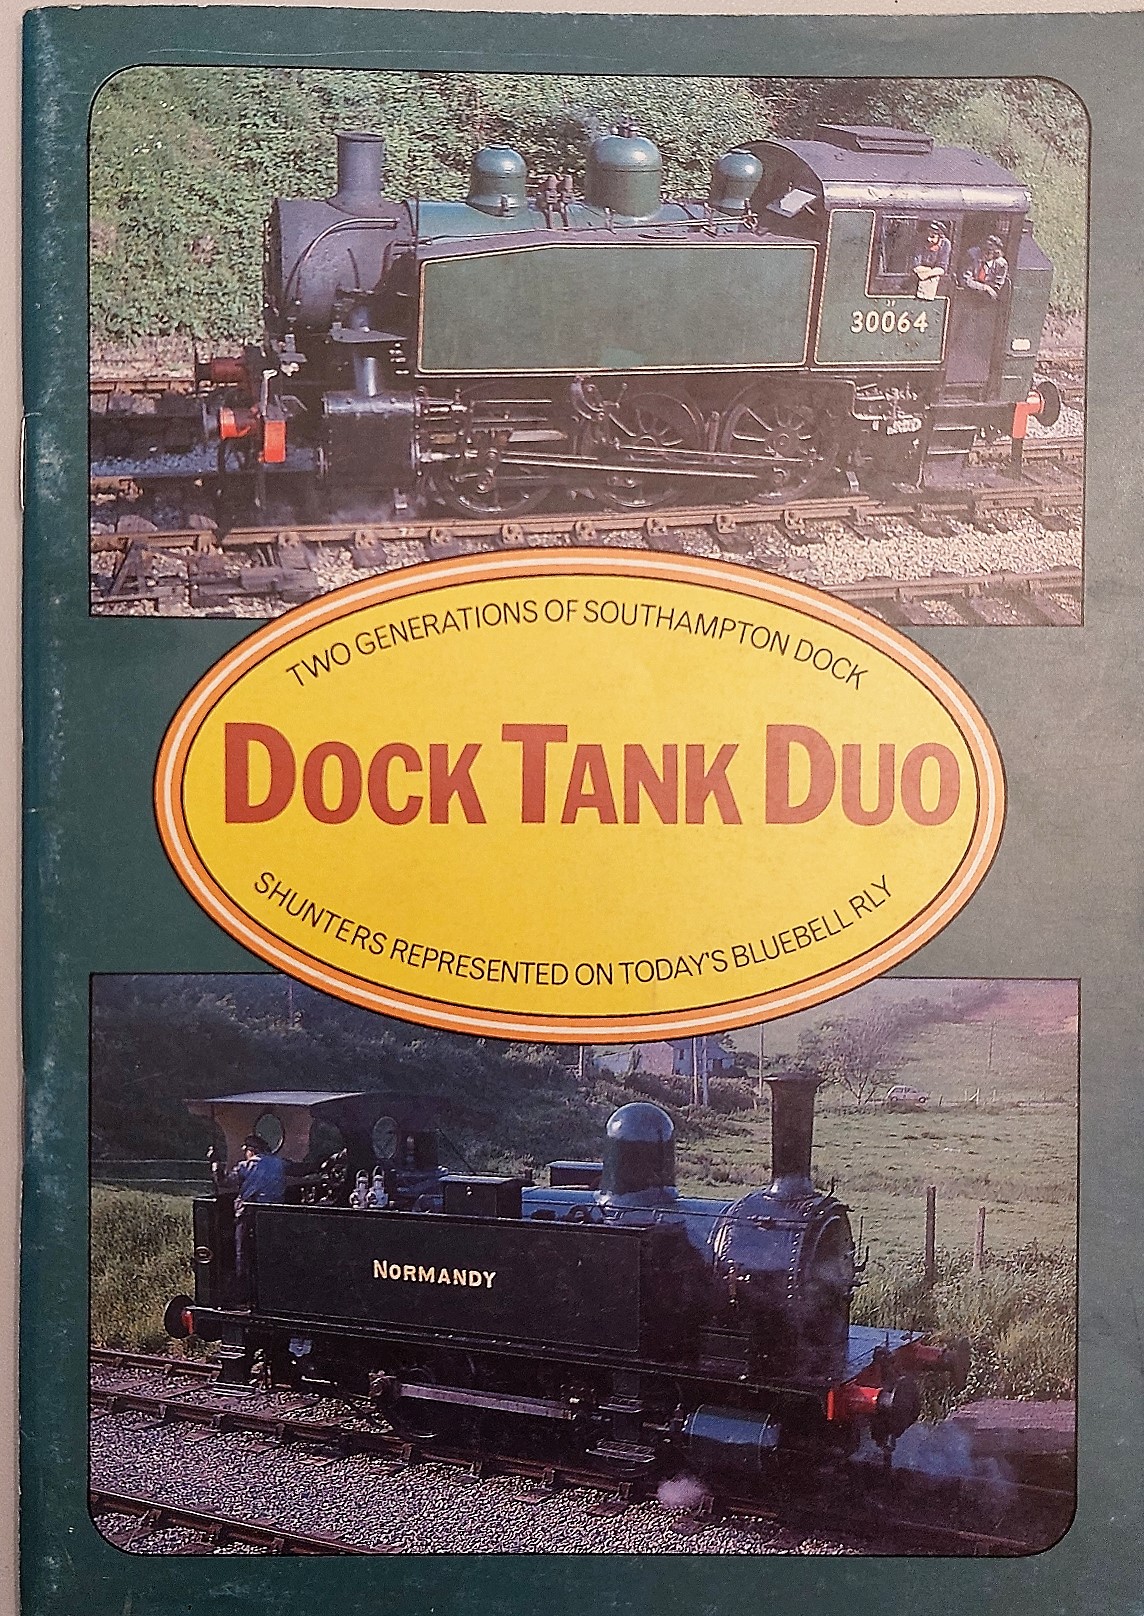 Image for Dock Tank Duo. Two Generations of Southampton Dock. Shunters Represented on Today's Bluebell Railway